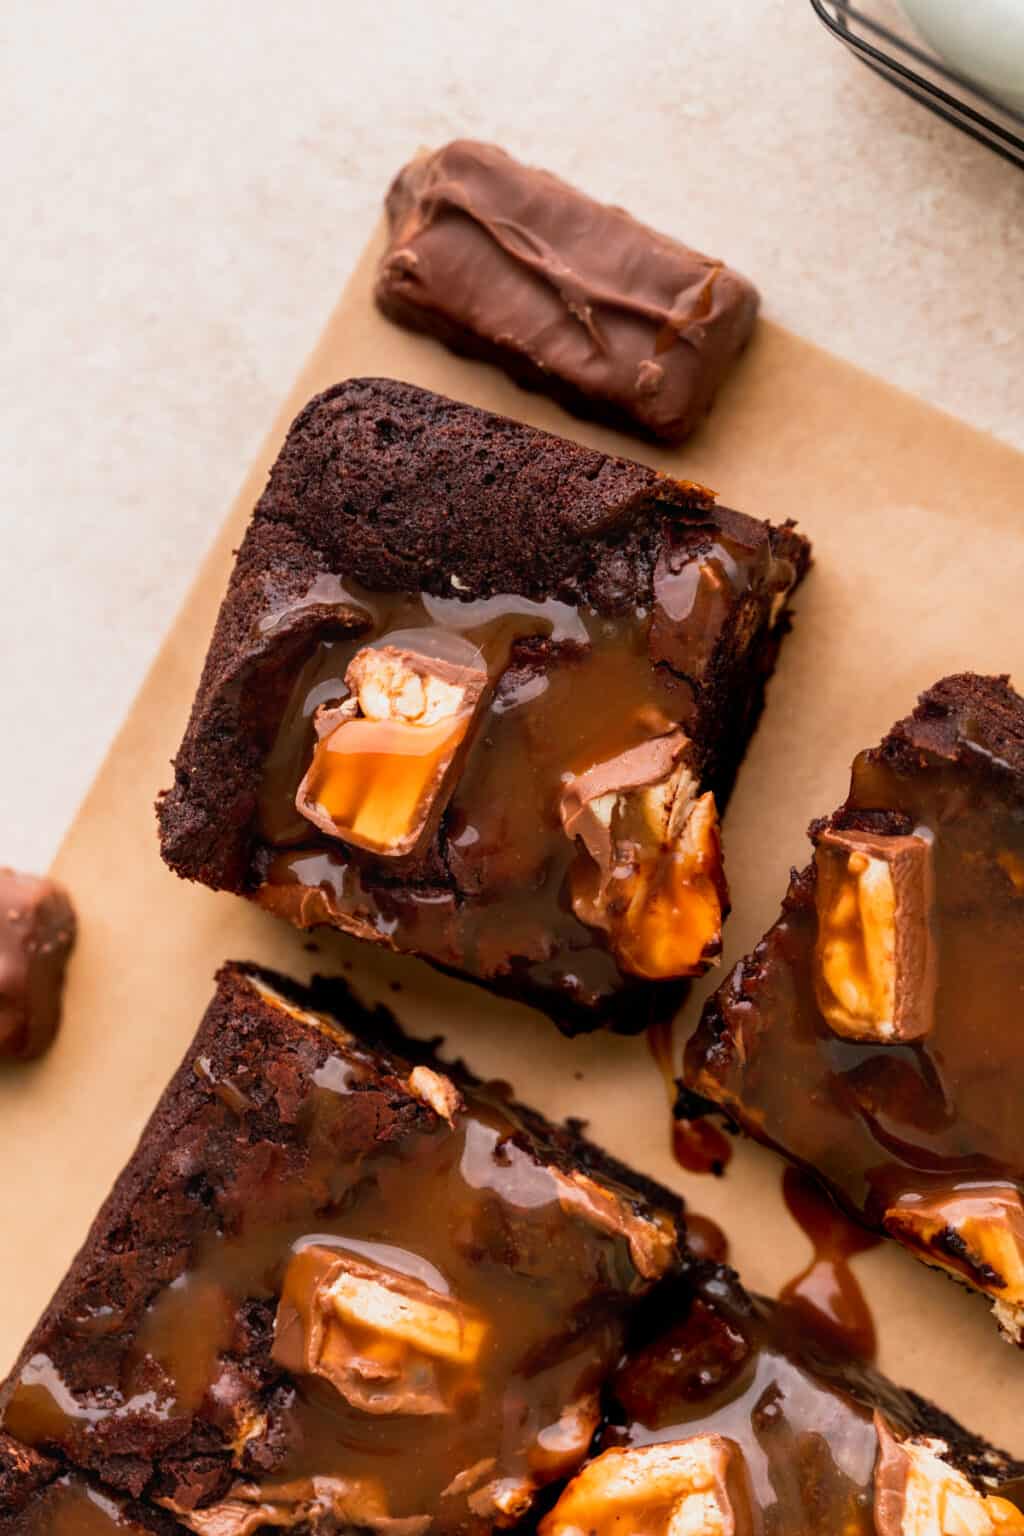 This Specialty Brownies is made with love by What A Delightful Treat! Shop more unique gift ideas today with Spots Initiatives, the best way to support creators.